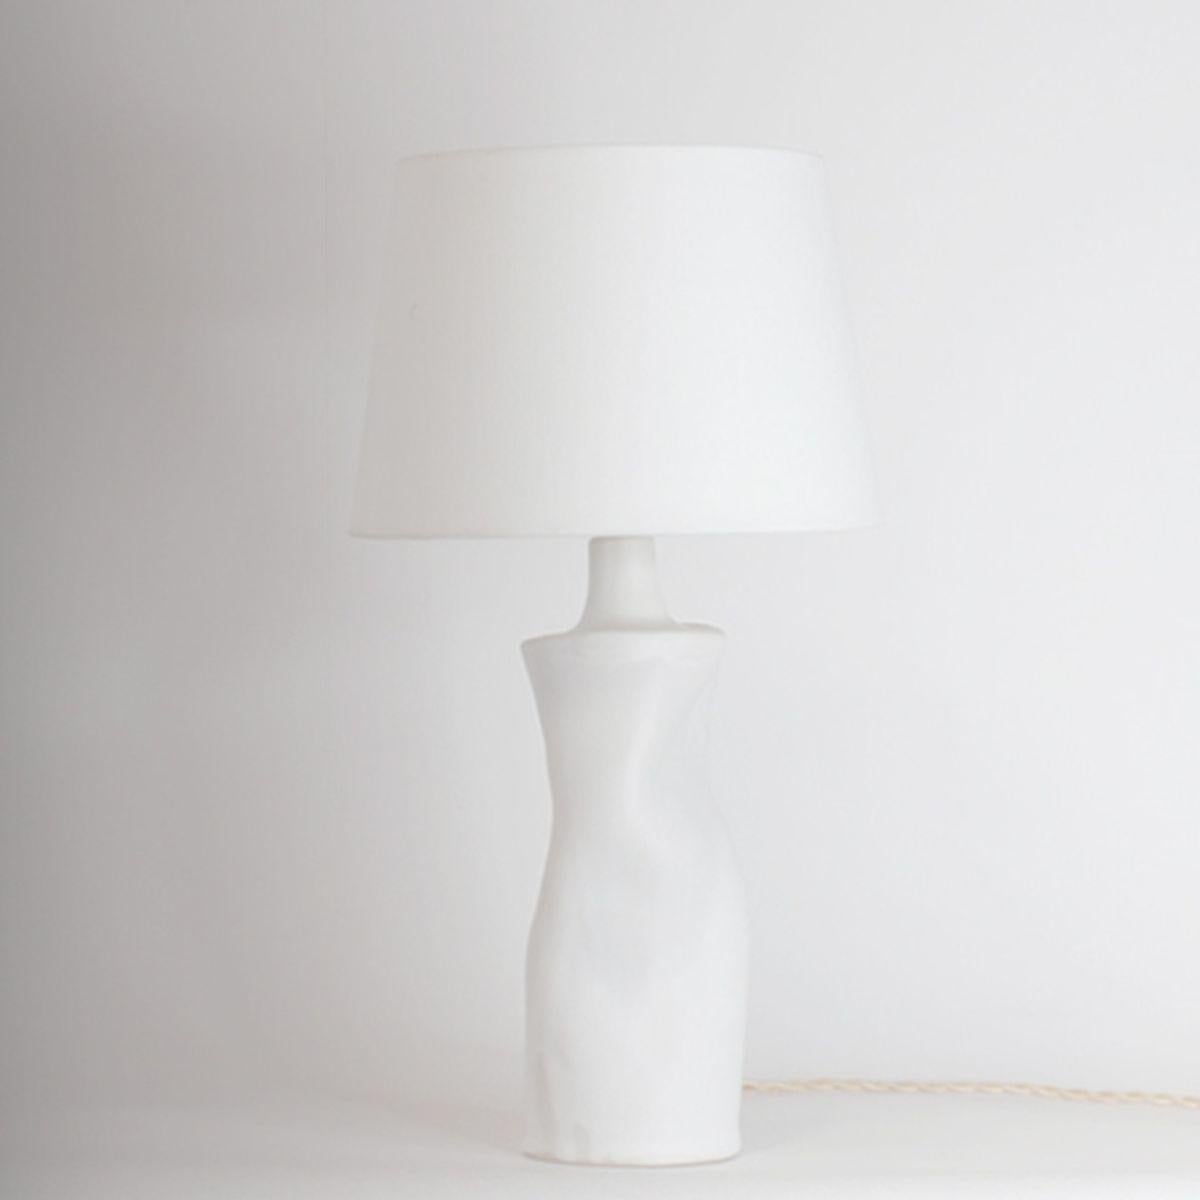 'Difforme' white ceramic table lamp with parchment shade by Design Frères.

Wired with high-end twist cord and 3-way switch (on, half intensity, off). A 40w filament bulb is included in your order. The European style parchment shade (no harp or